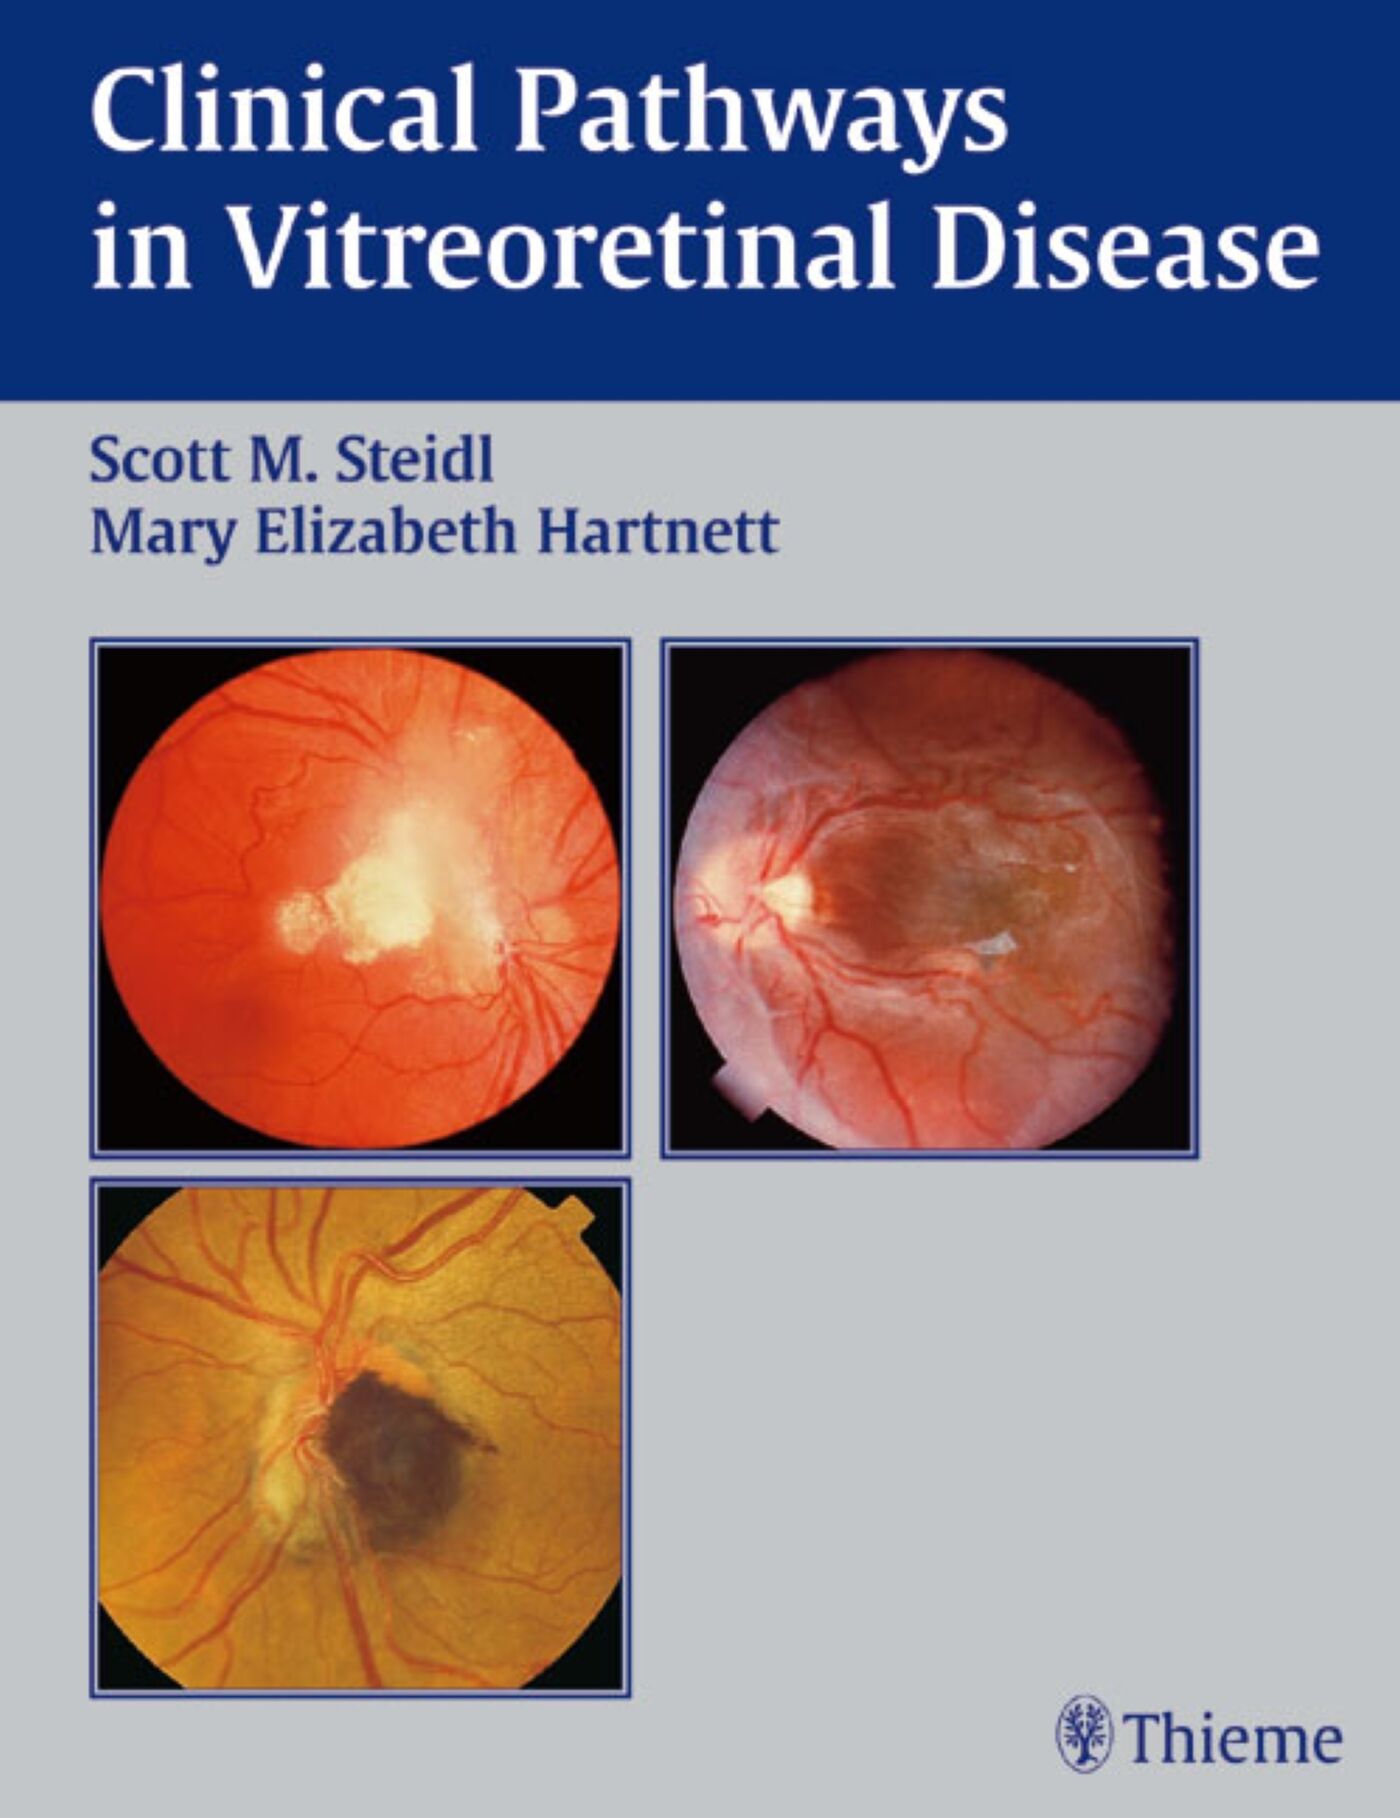 Clinical Pathways In Vitreoretinal Disease, 9781588901194